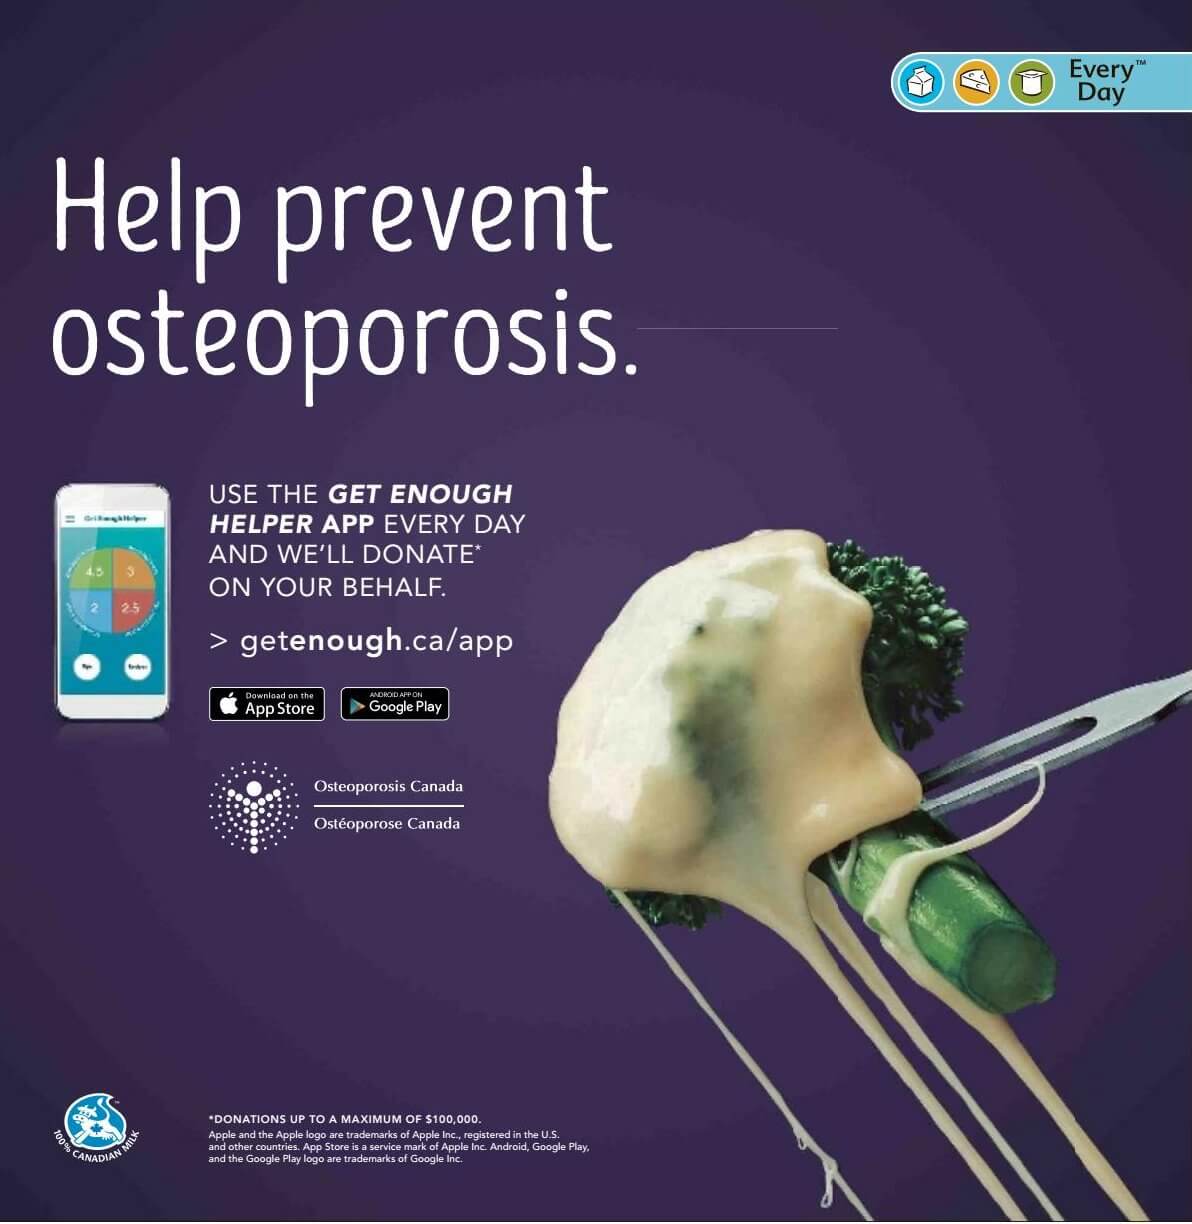 Infographic of a broccoli with cheese the the Osteoporosis Canada and Canadian dairy logo with the mention help prevent osteoporosis